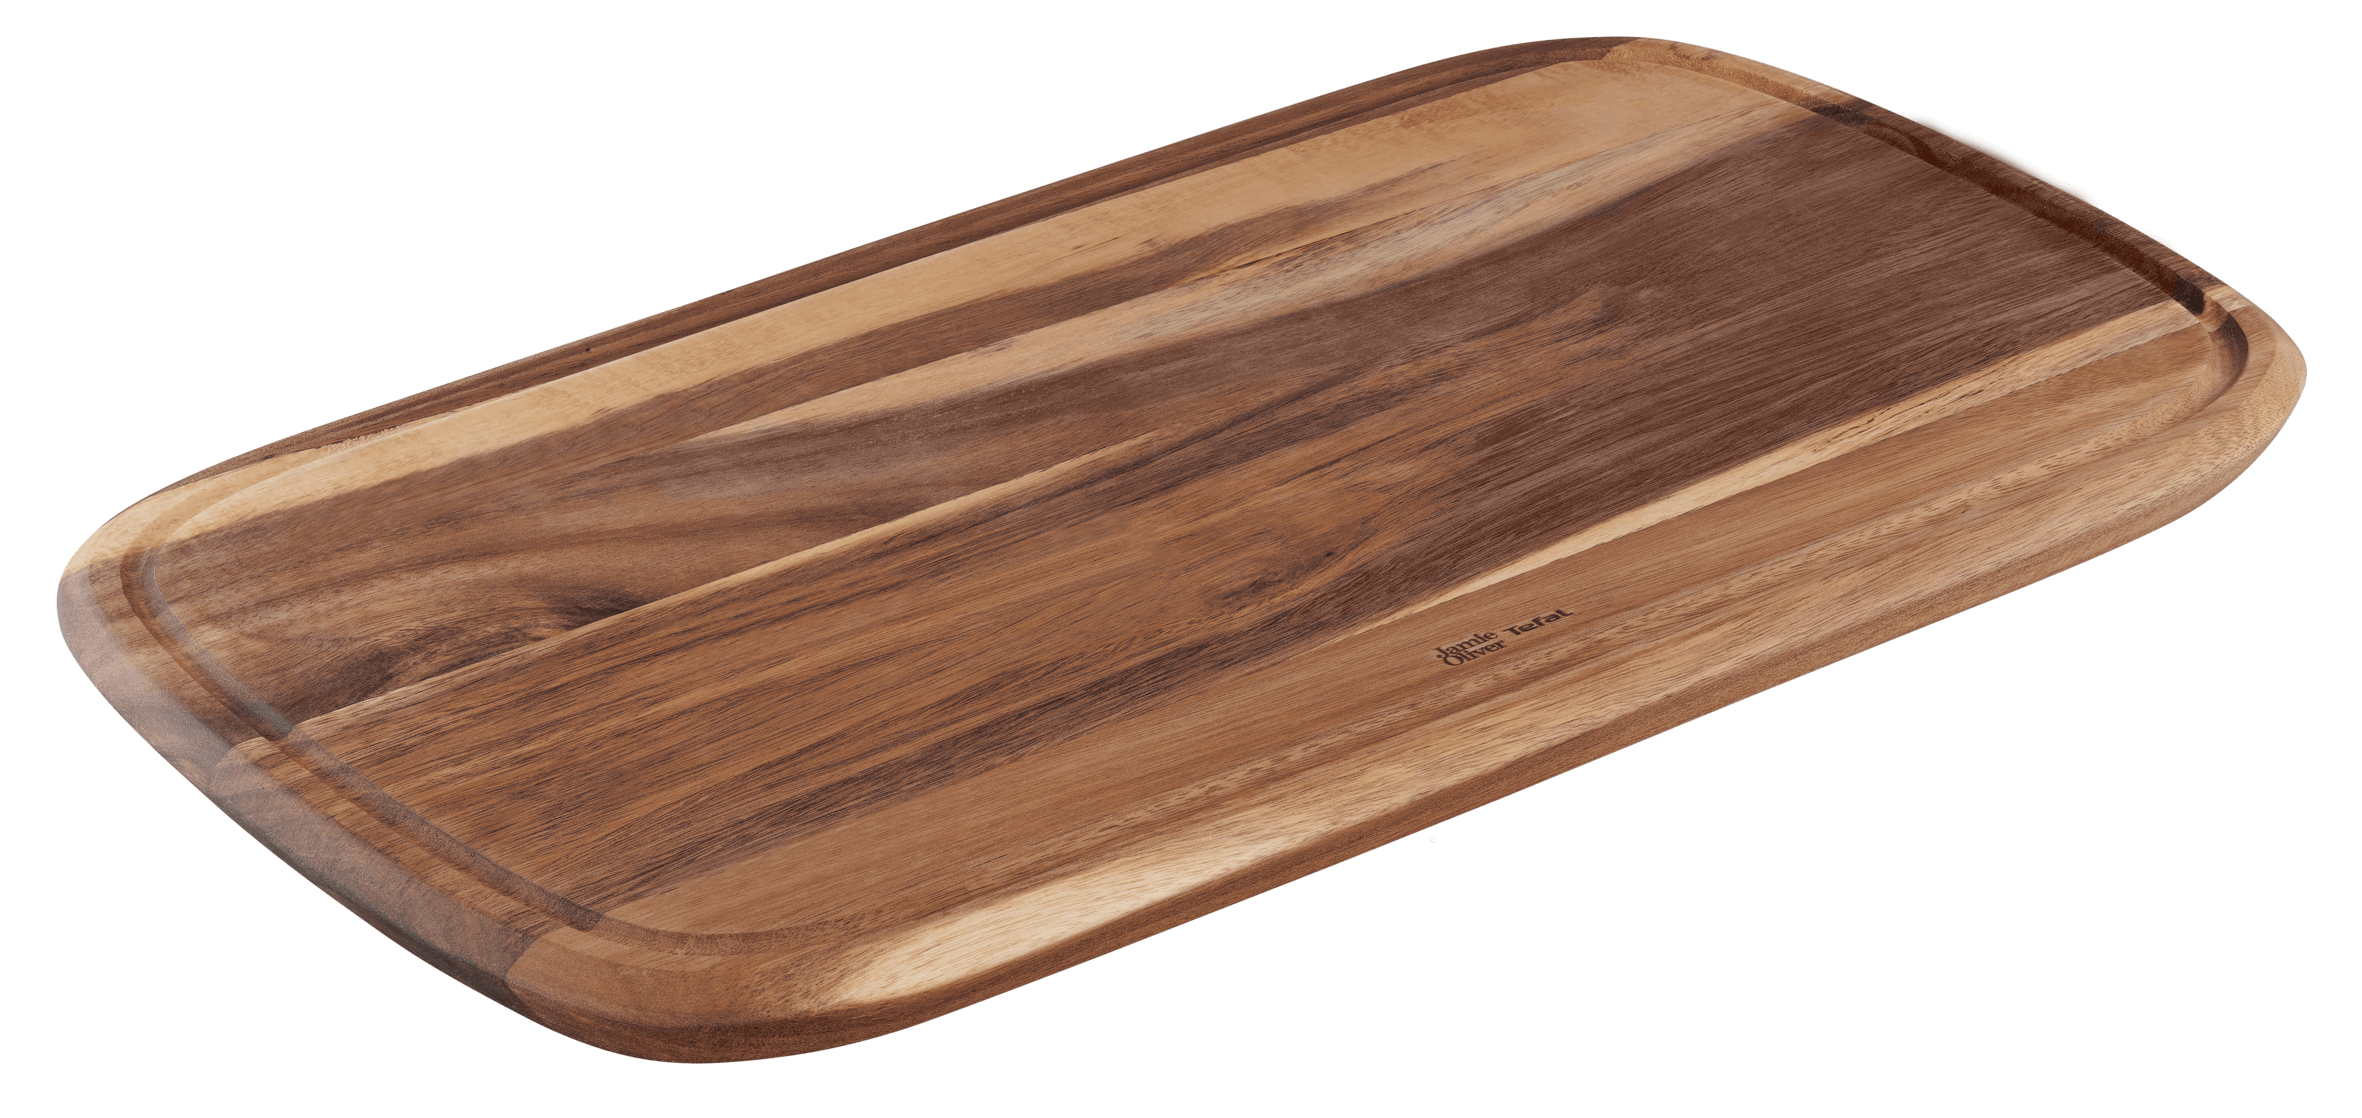 Jamie Oliver by Tefal Wooden Acacia Board - Large (49 x 28 x 2.5cm)